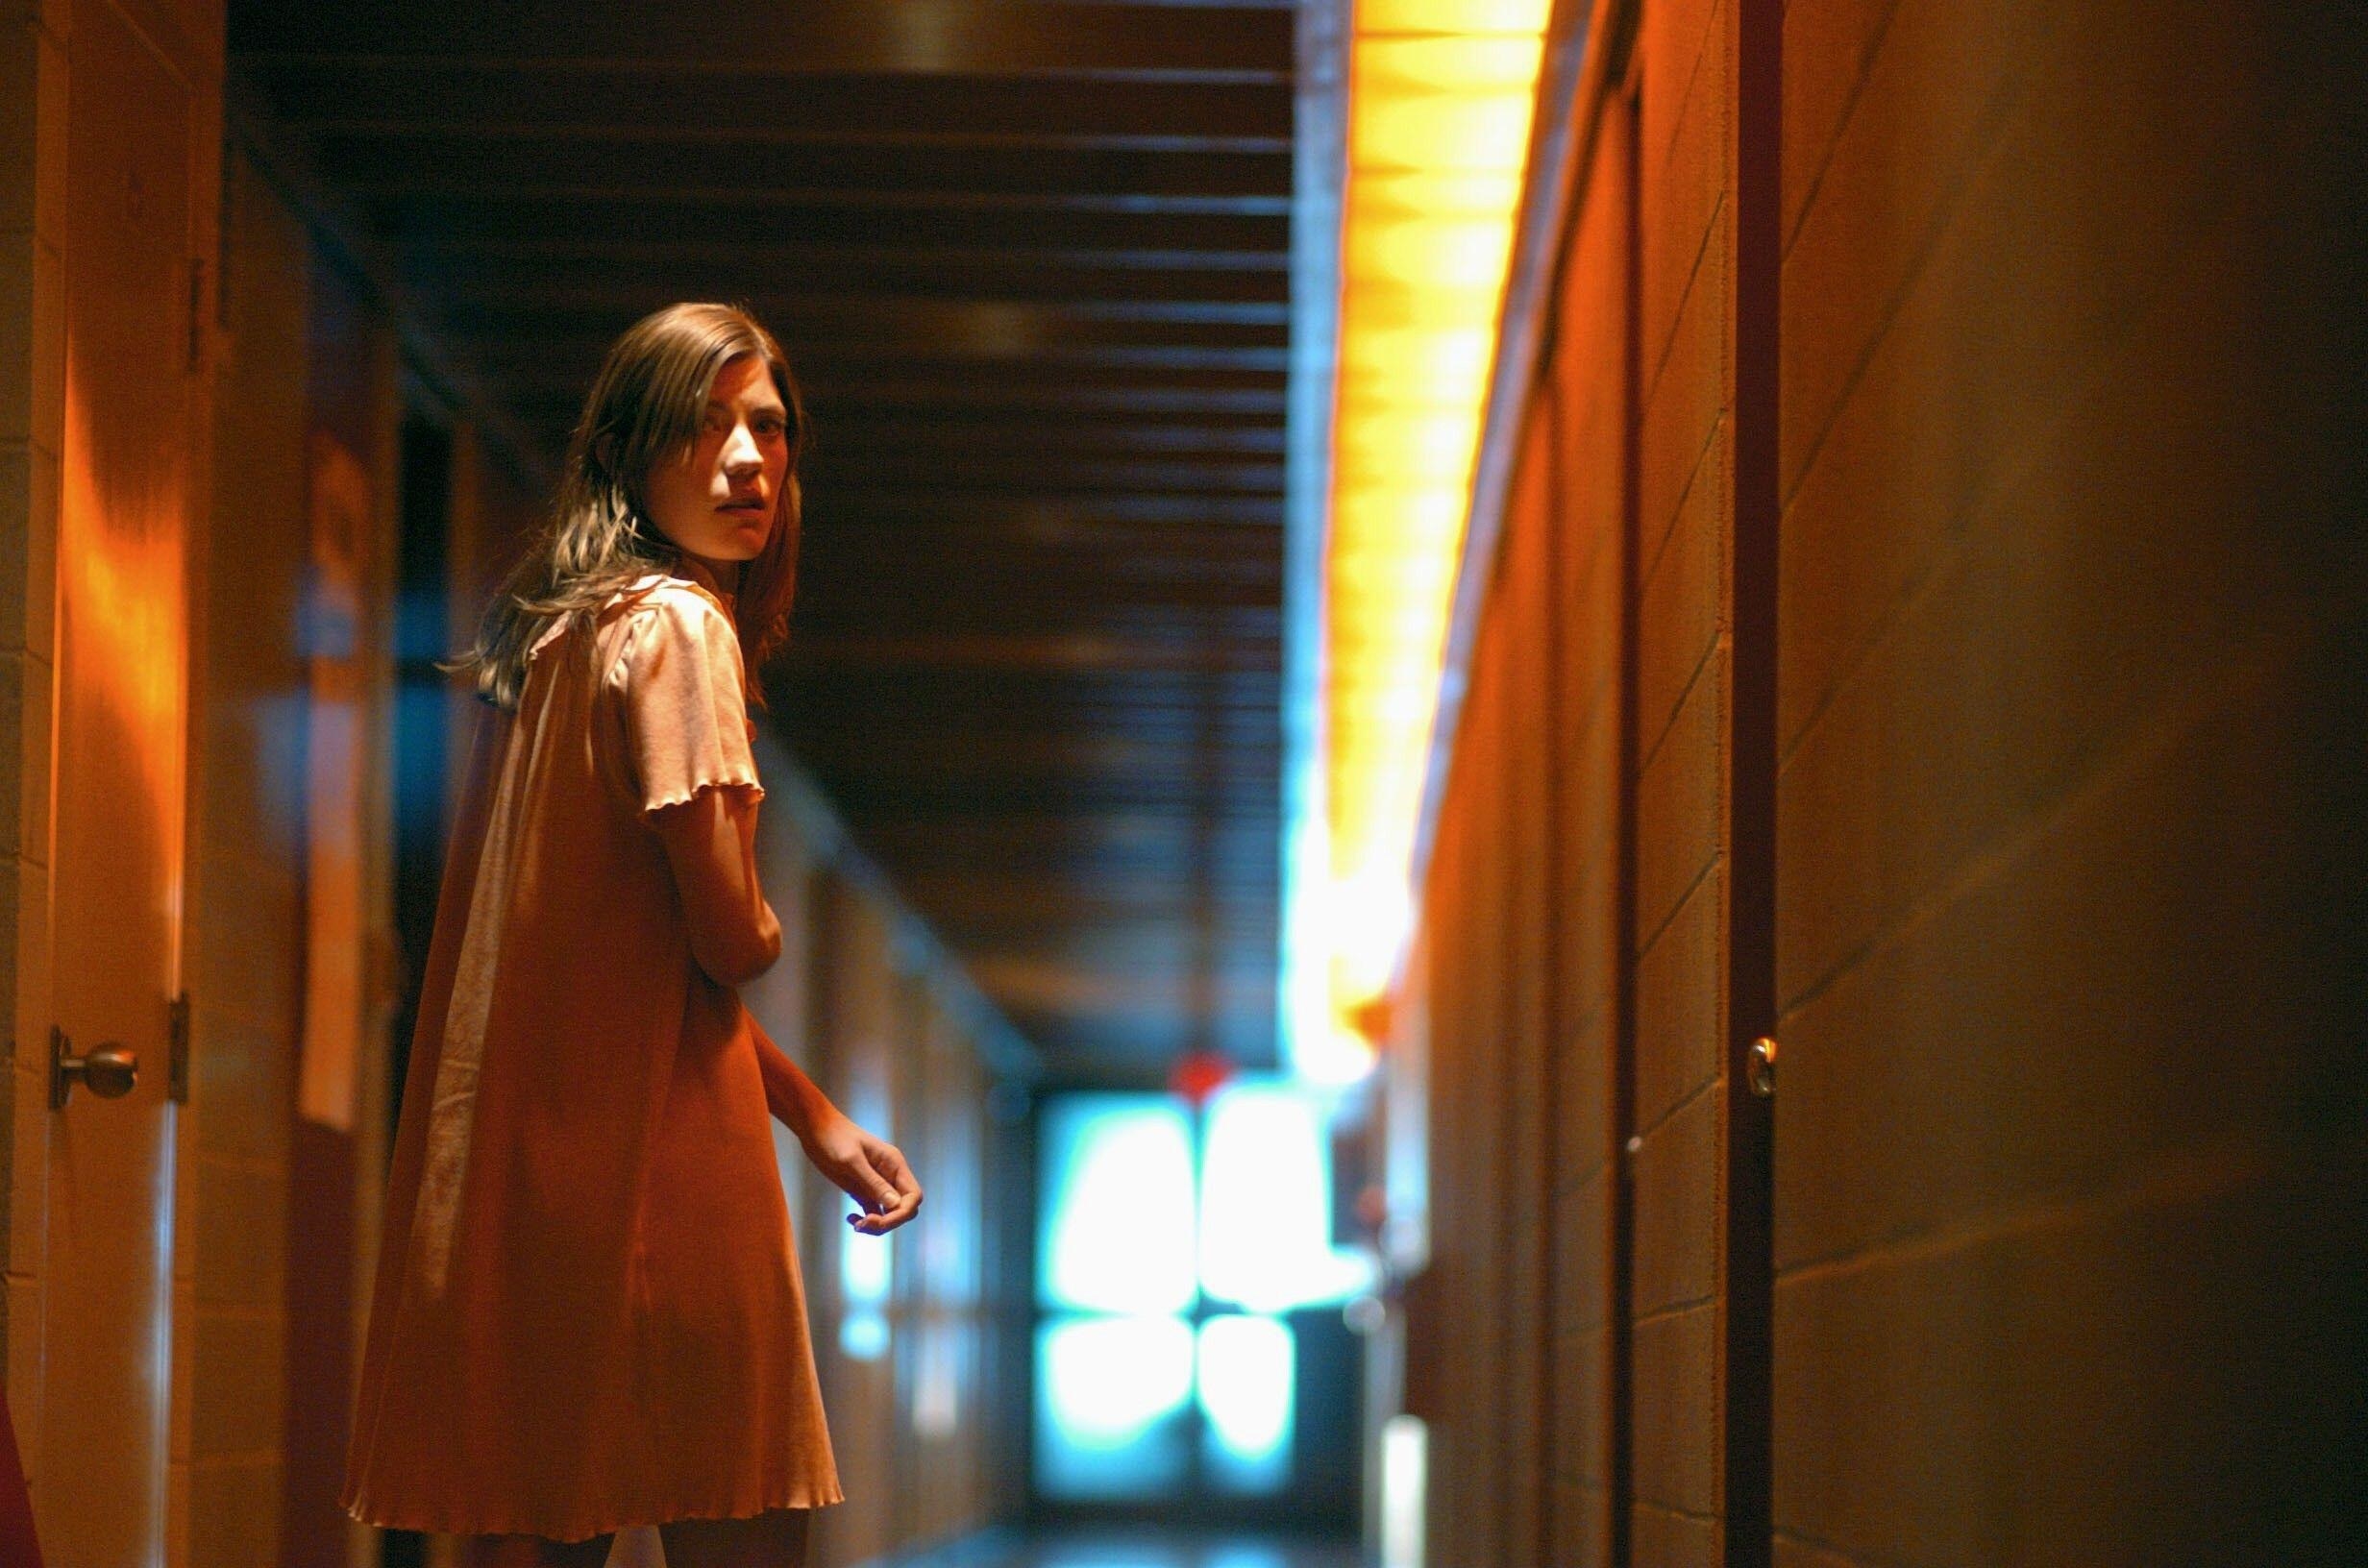 A scared young woman stares down a dimly lit hallway